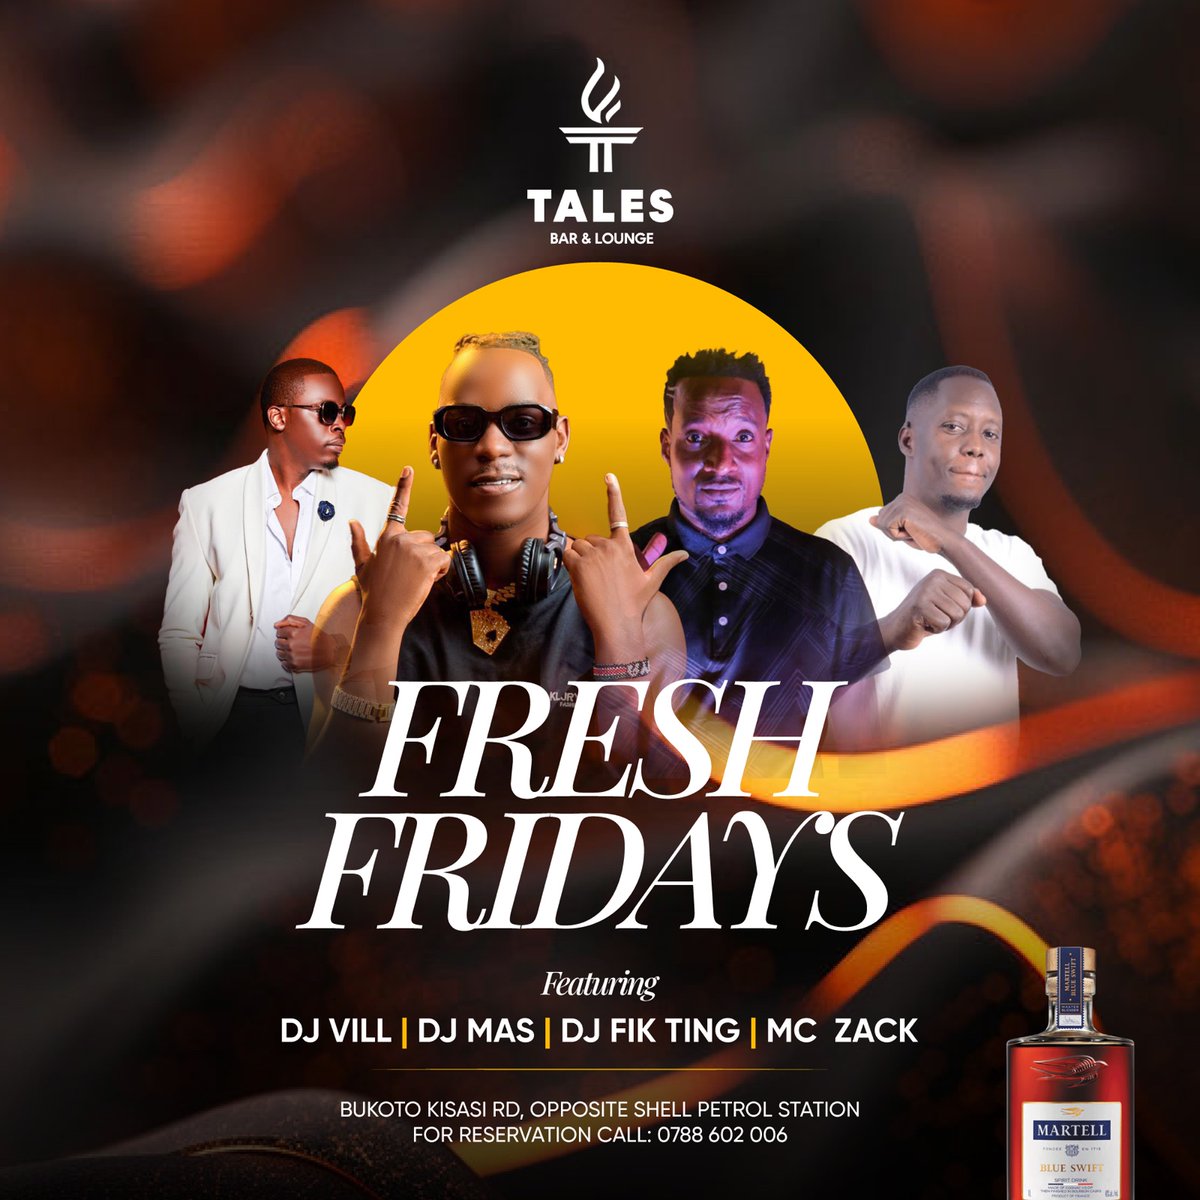 Friday just got better with our lineup of talented DJs hosted by MC Zack! Get ready to groove to the beats of Dj Vill, Dj Mas, and Dj Fik Ting! Let's turn up the vibes and kickstart the weekend in style! See you there! #FreshFridayAtTales #TalesOfTheNight